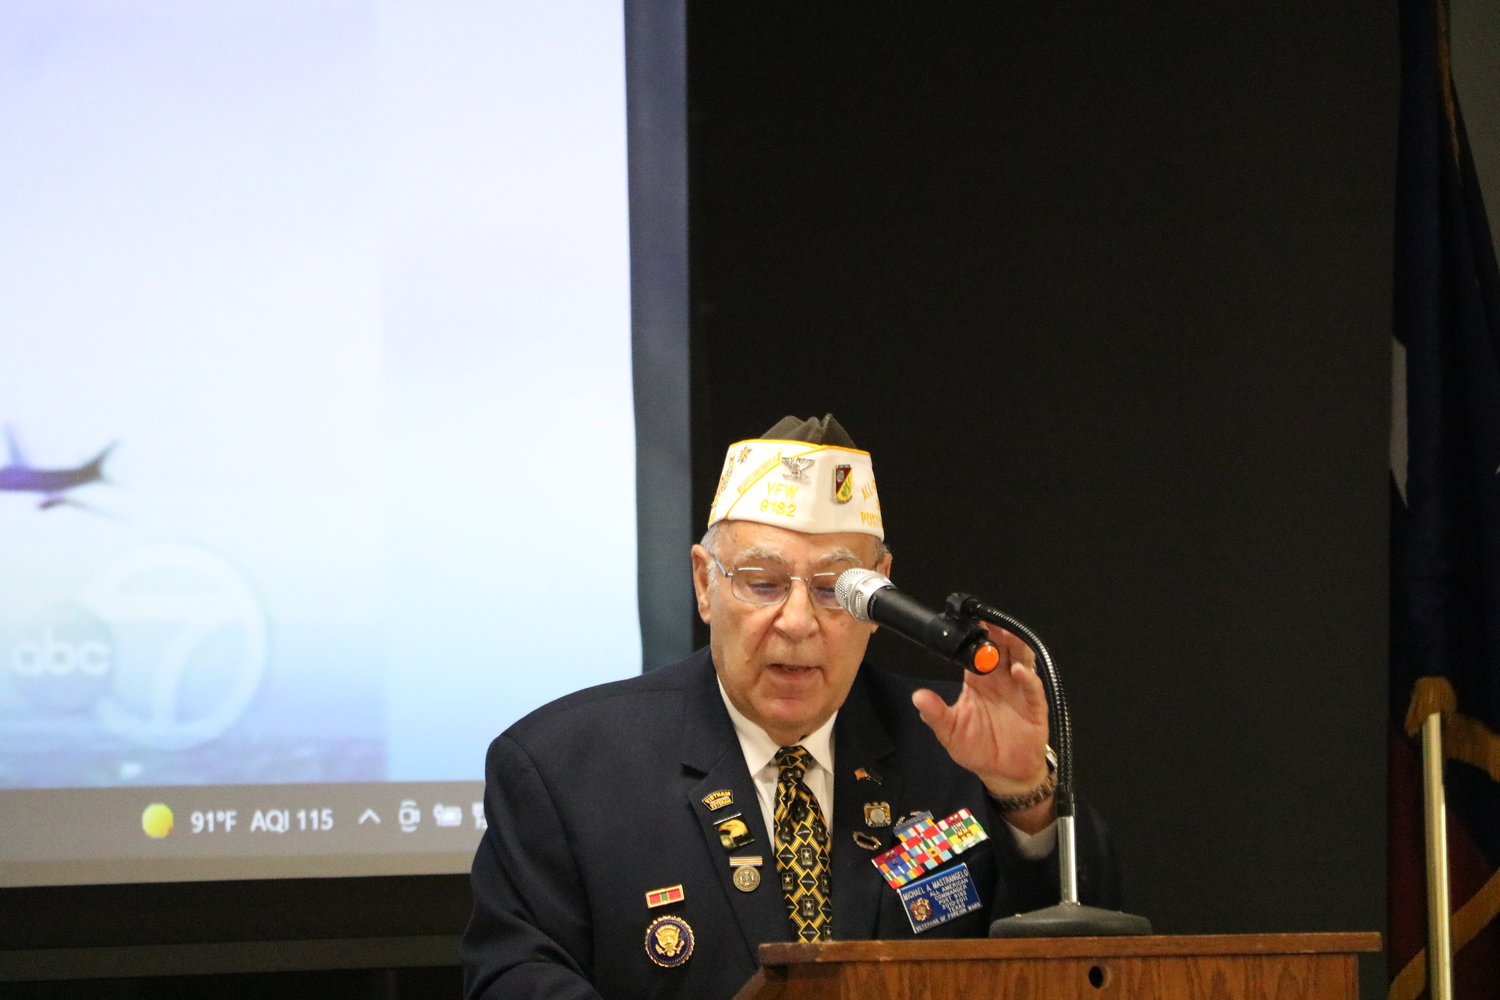 Mike Mastrangelo speaks during Saturday's 9/11 event at the Katy VFW.